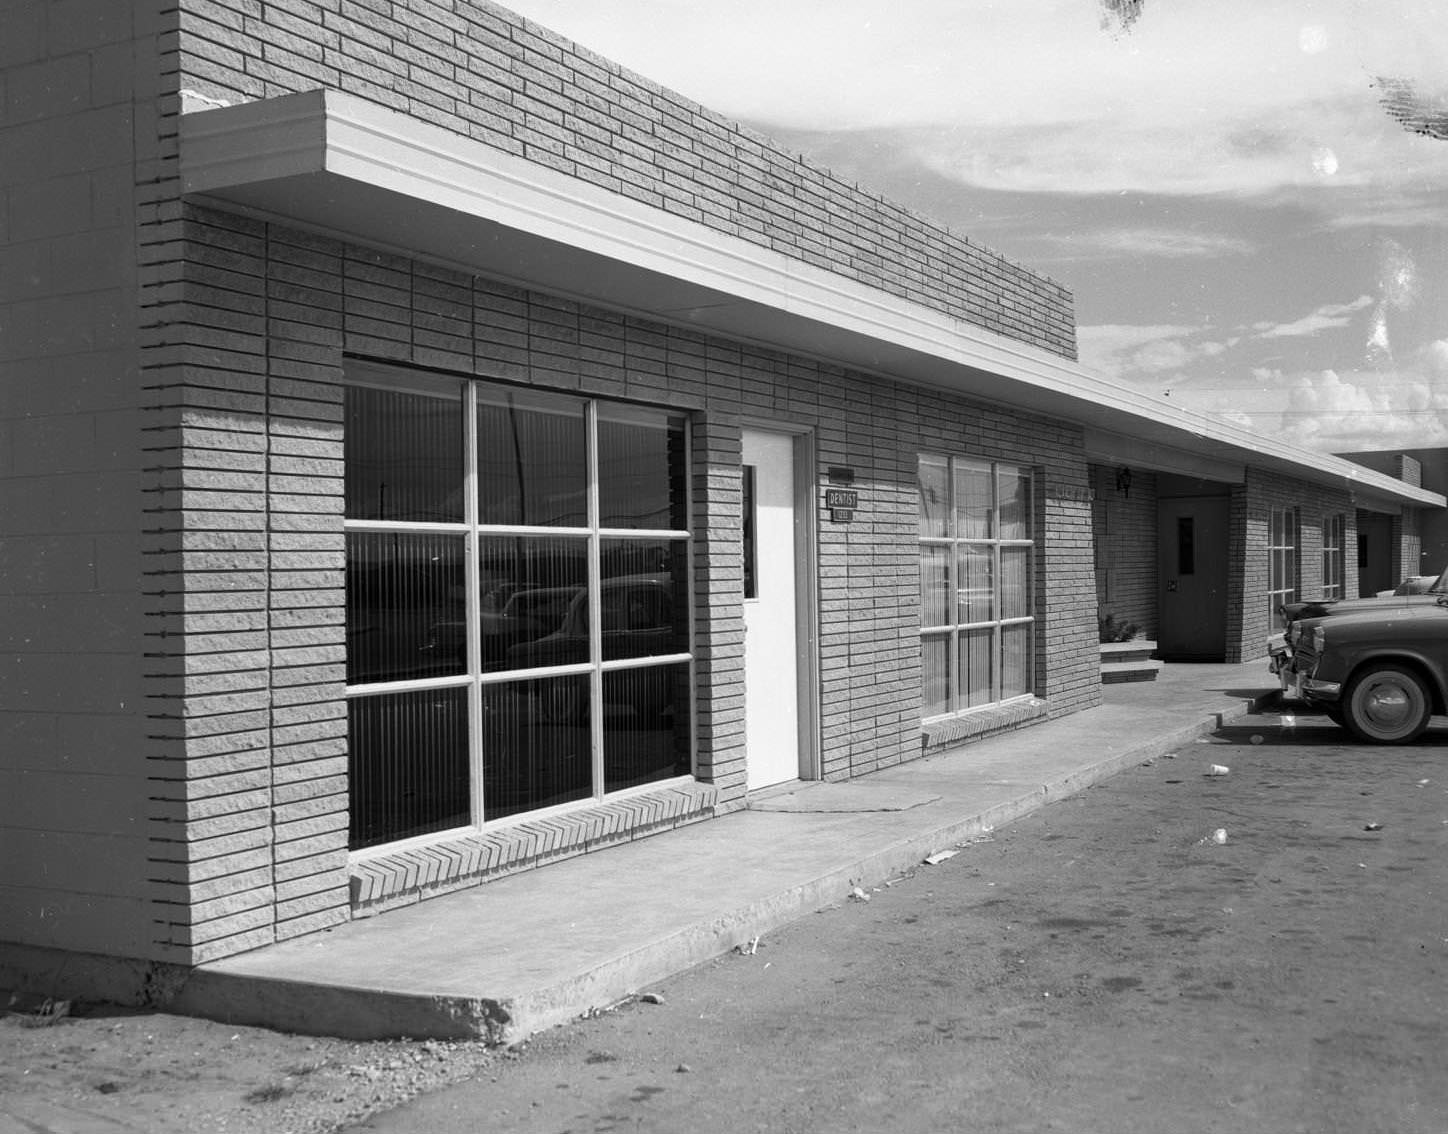 An exterior view of a brick building identified as Doctor Fox's Office, 1959